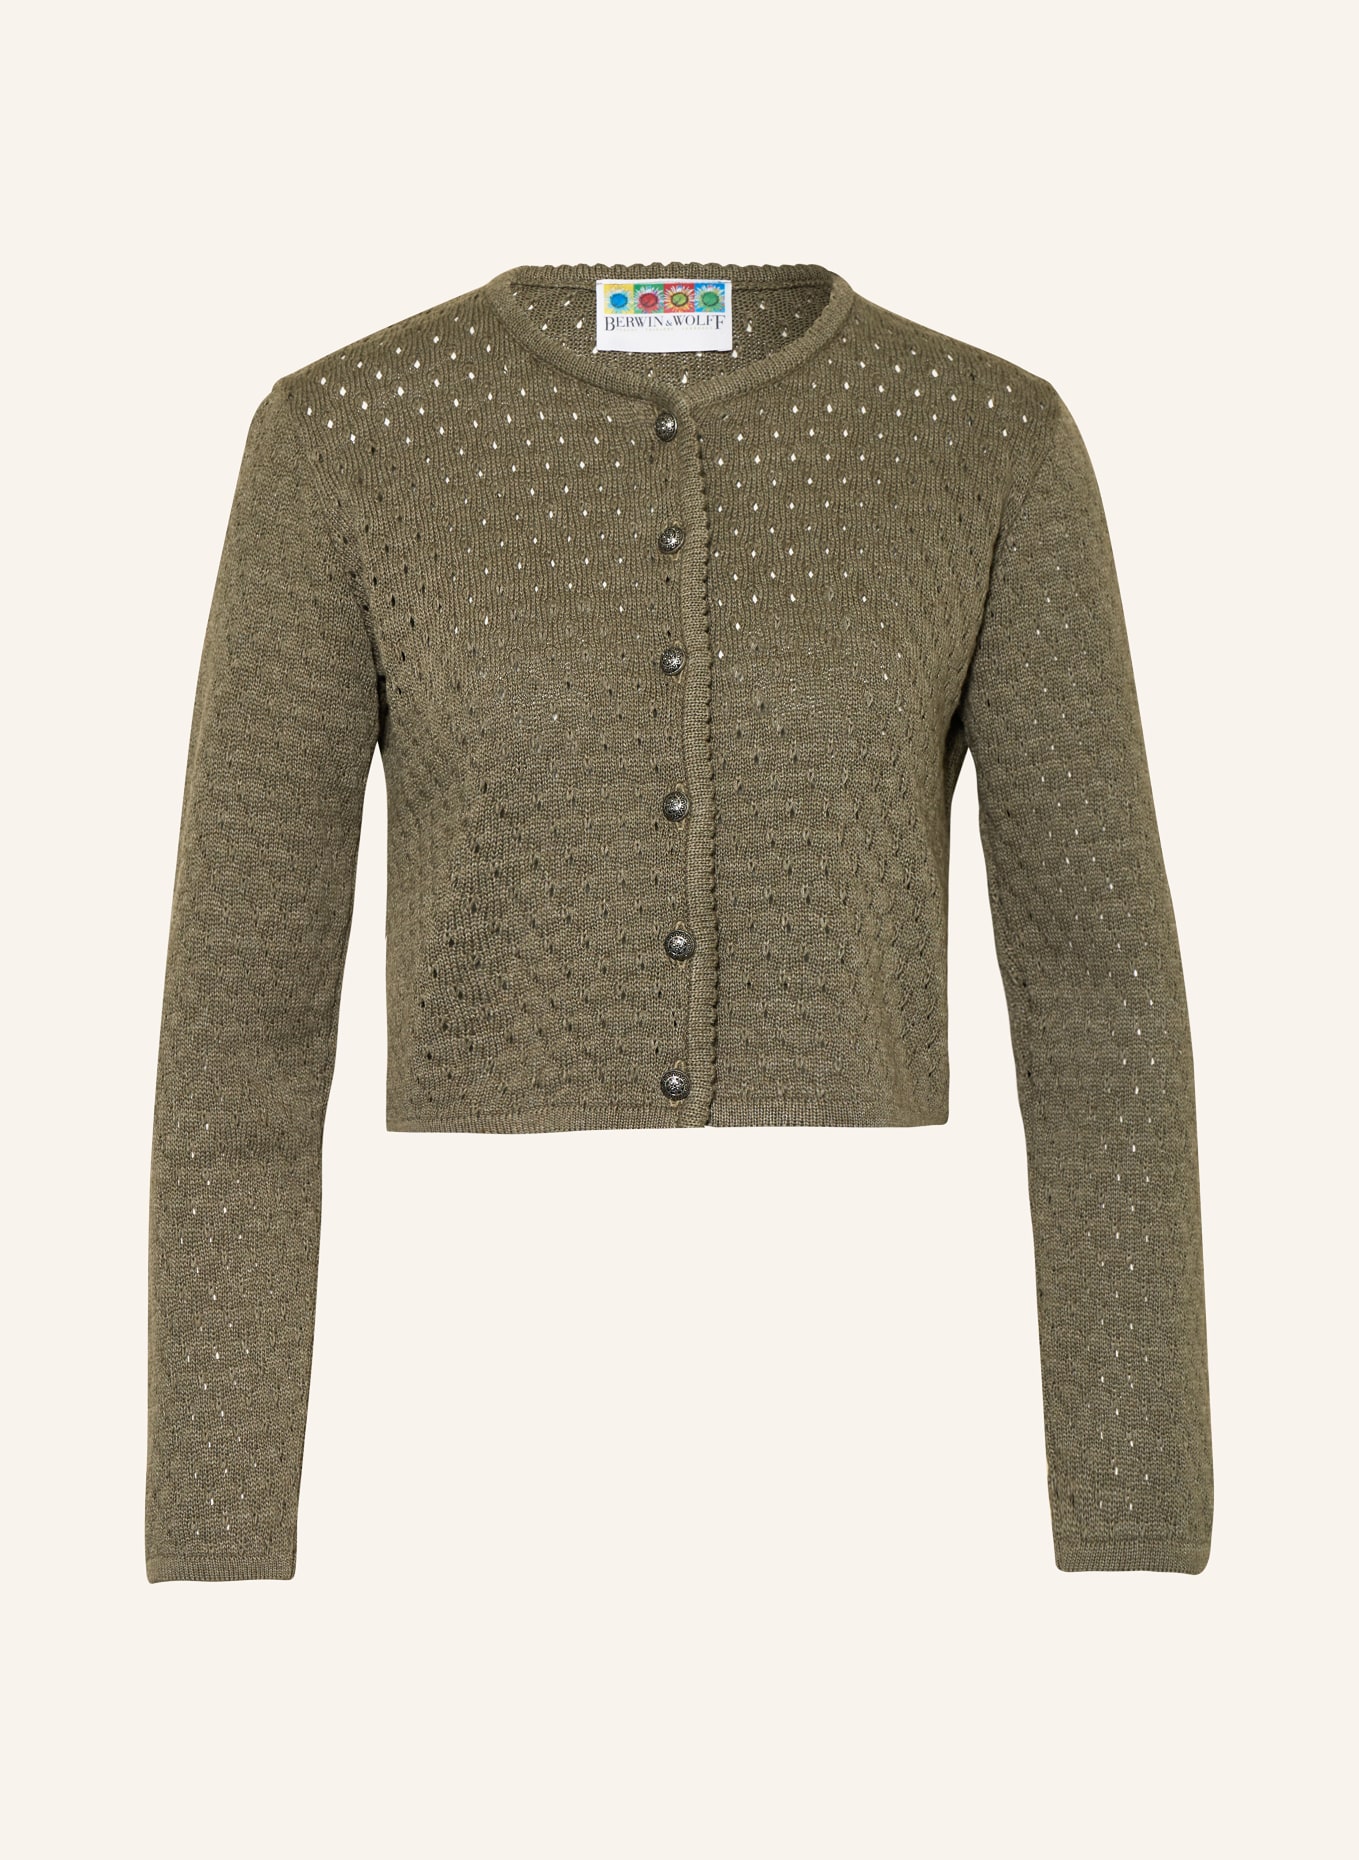 BERWIN & WOLFF Knit cardigan, Color: OLIVE (Image 1)